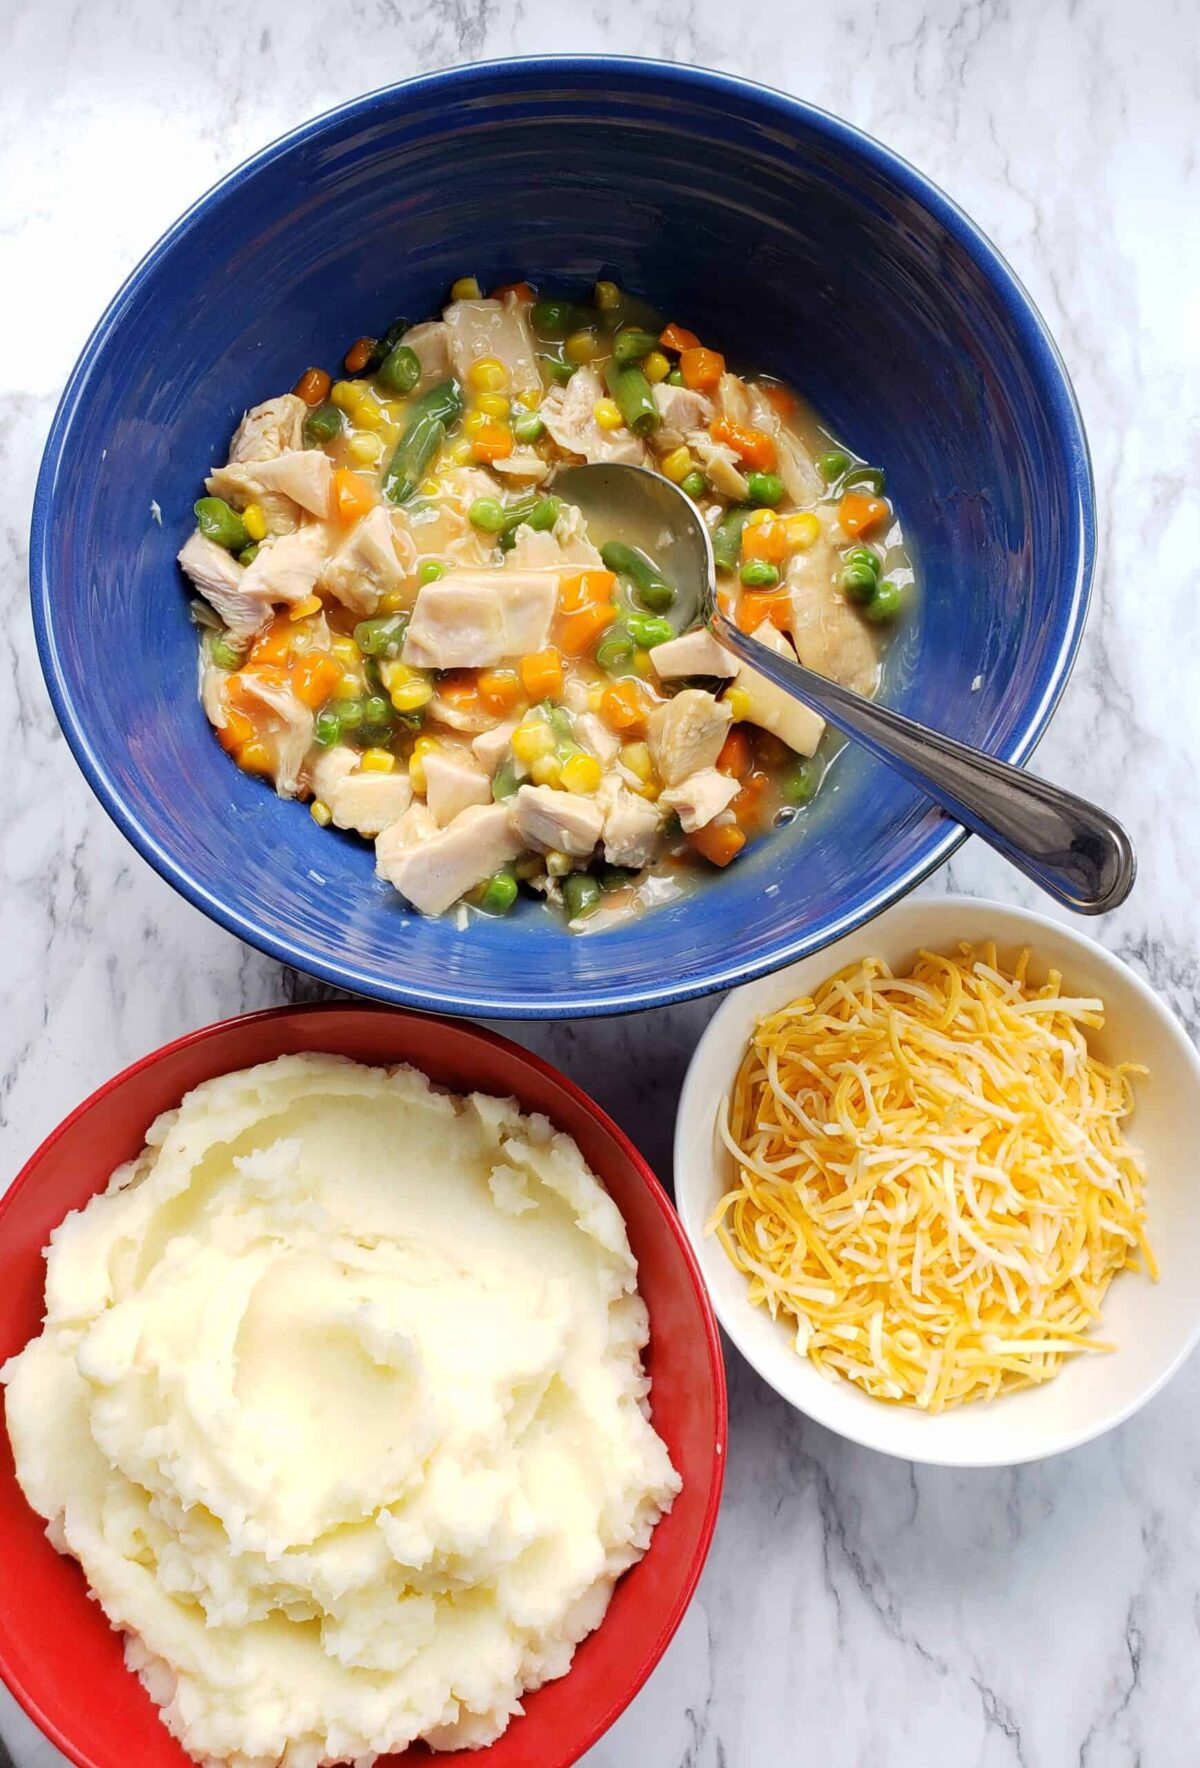 Chopped turkey, vegetables, and gravy in a blue bowl. Mashed potatoes in a red bowl. Shredded cheese in a small white bowl.